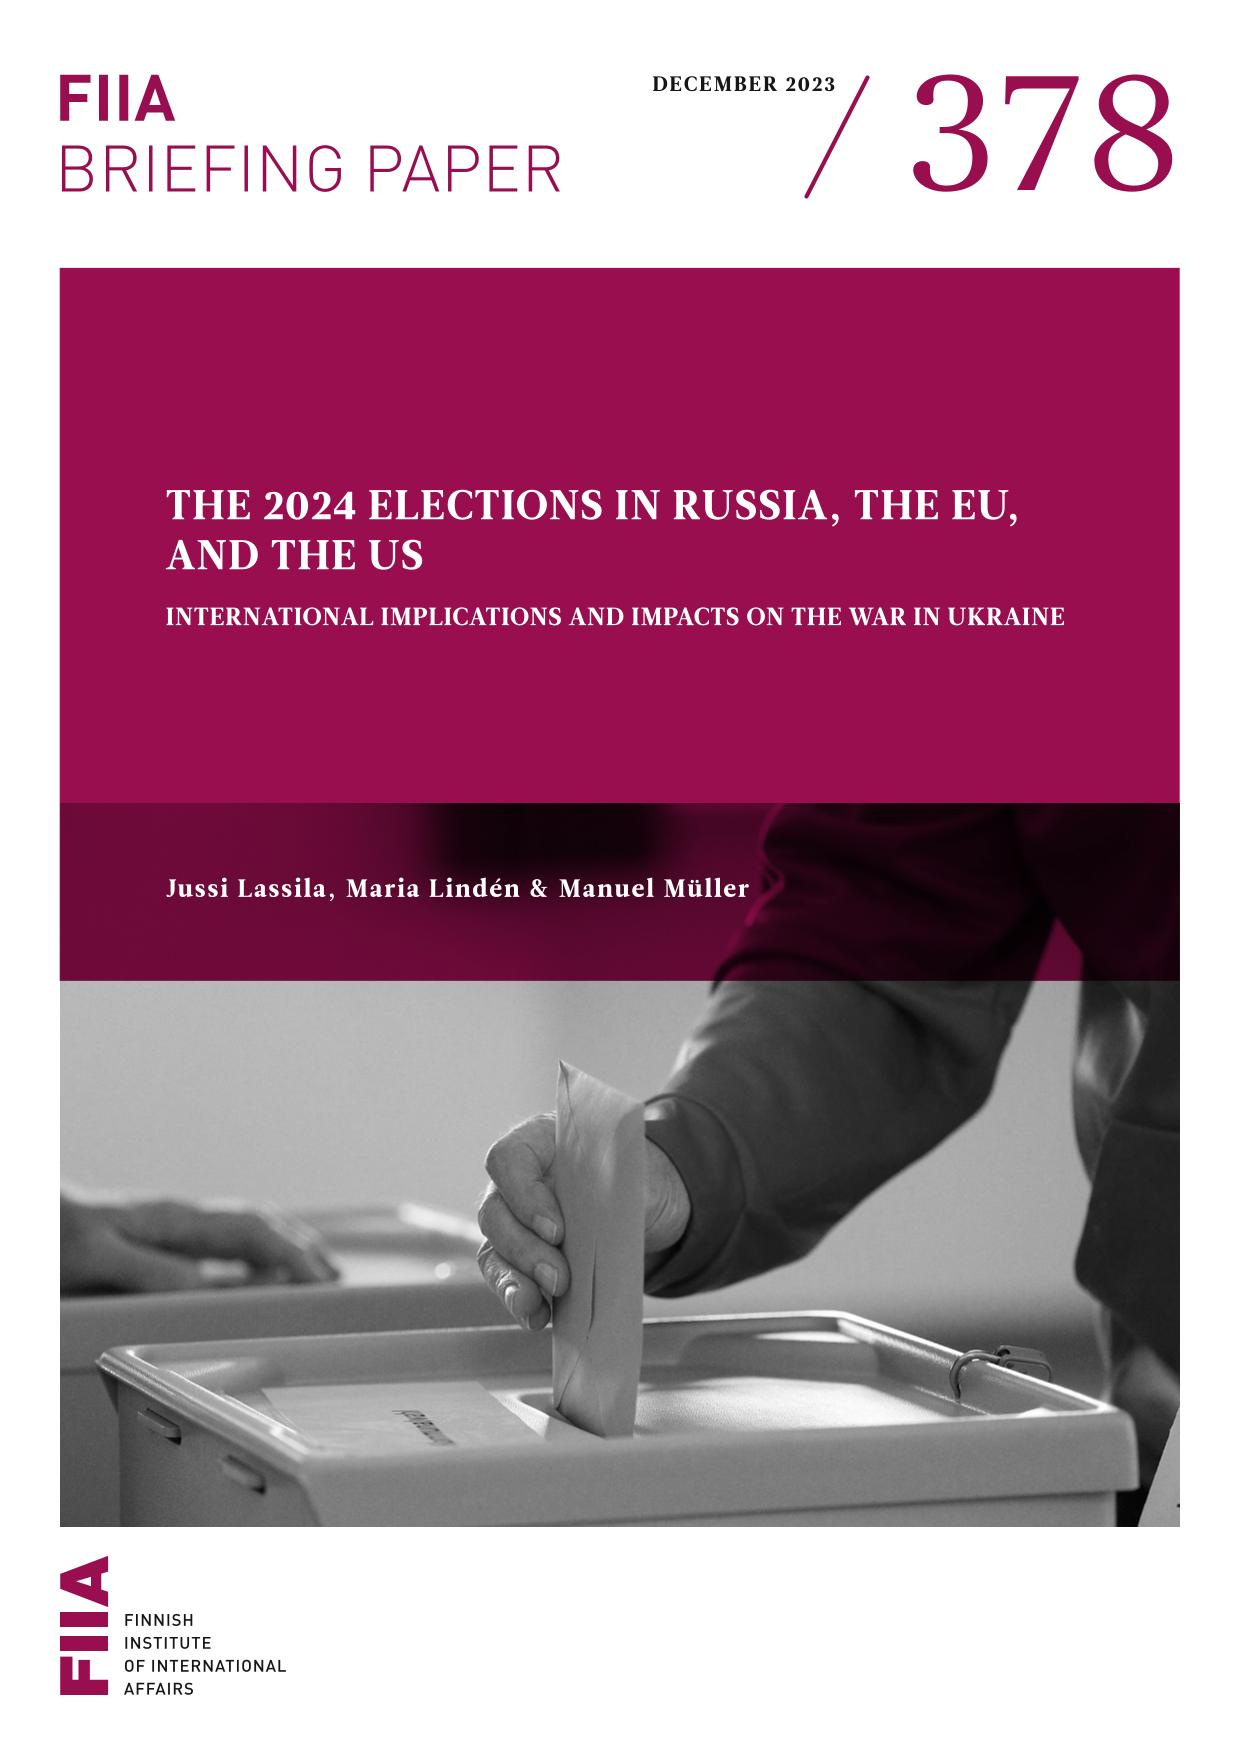 Deckblatt des FIIA Briefing Paper: The 2024 elections in Russia, the EU, and the US: International implications and impacts on the war in Ukraine